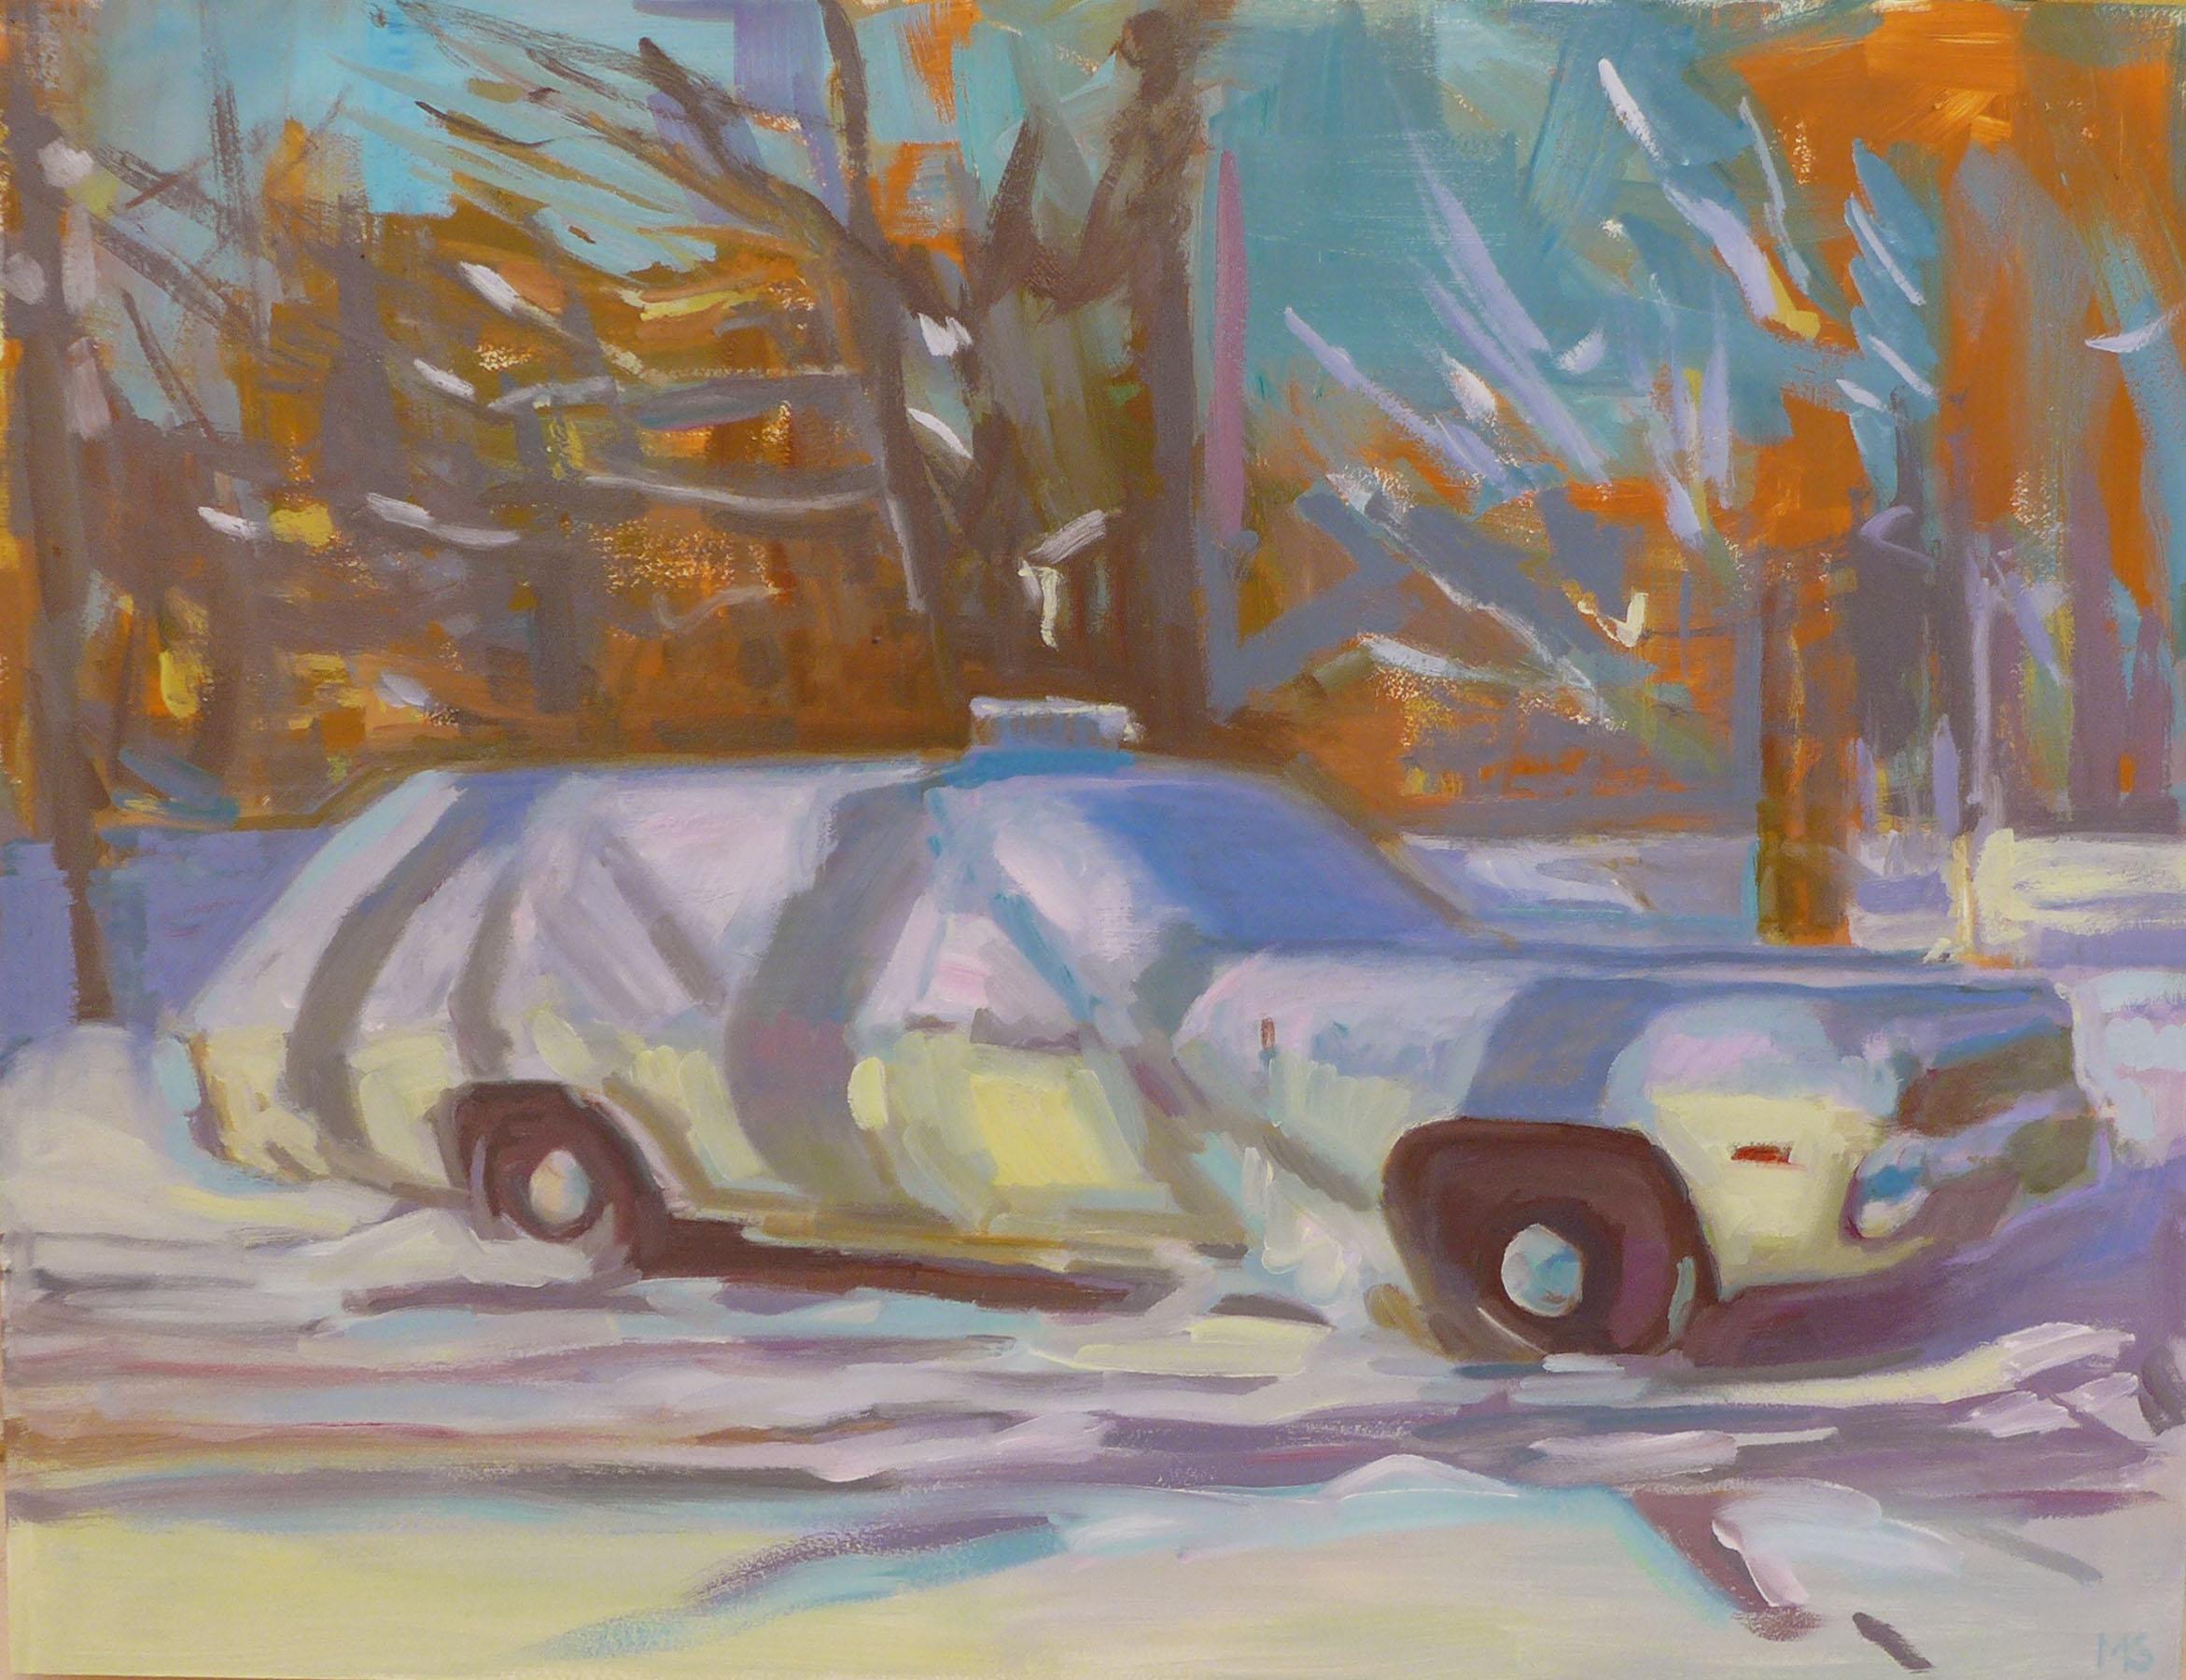 Mary Sinner Landscape Painting - "Covered With Snow" Original Oil Painting of Station Wagon in Winter